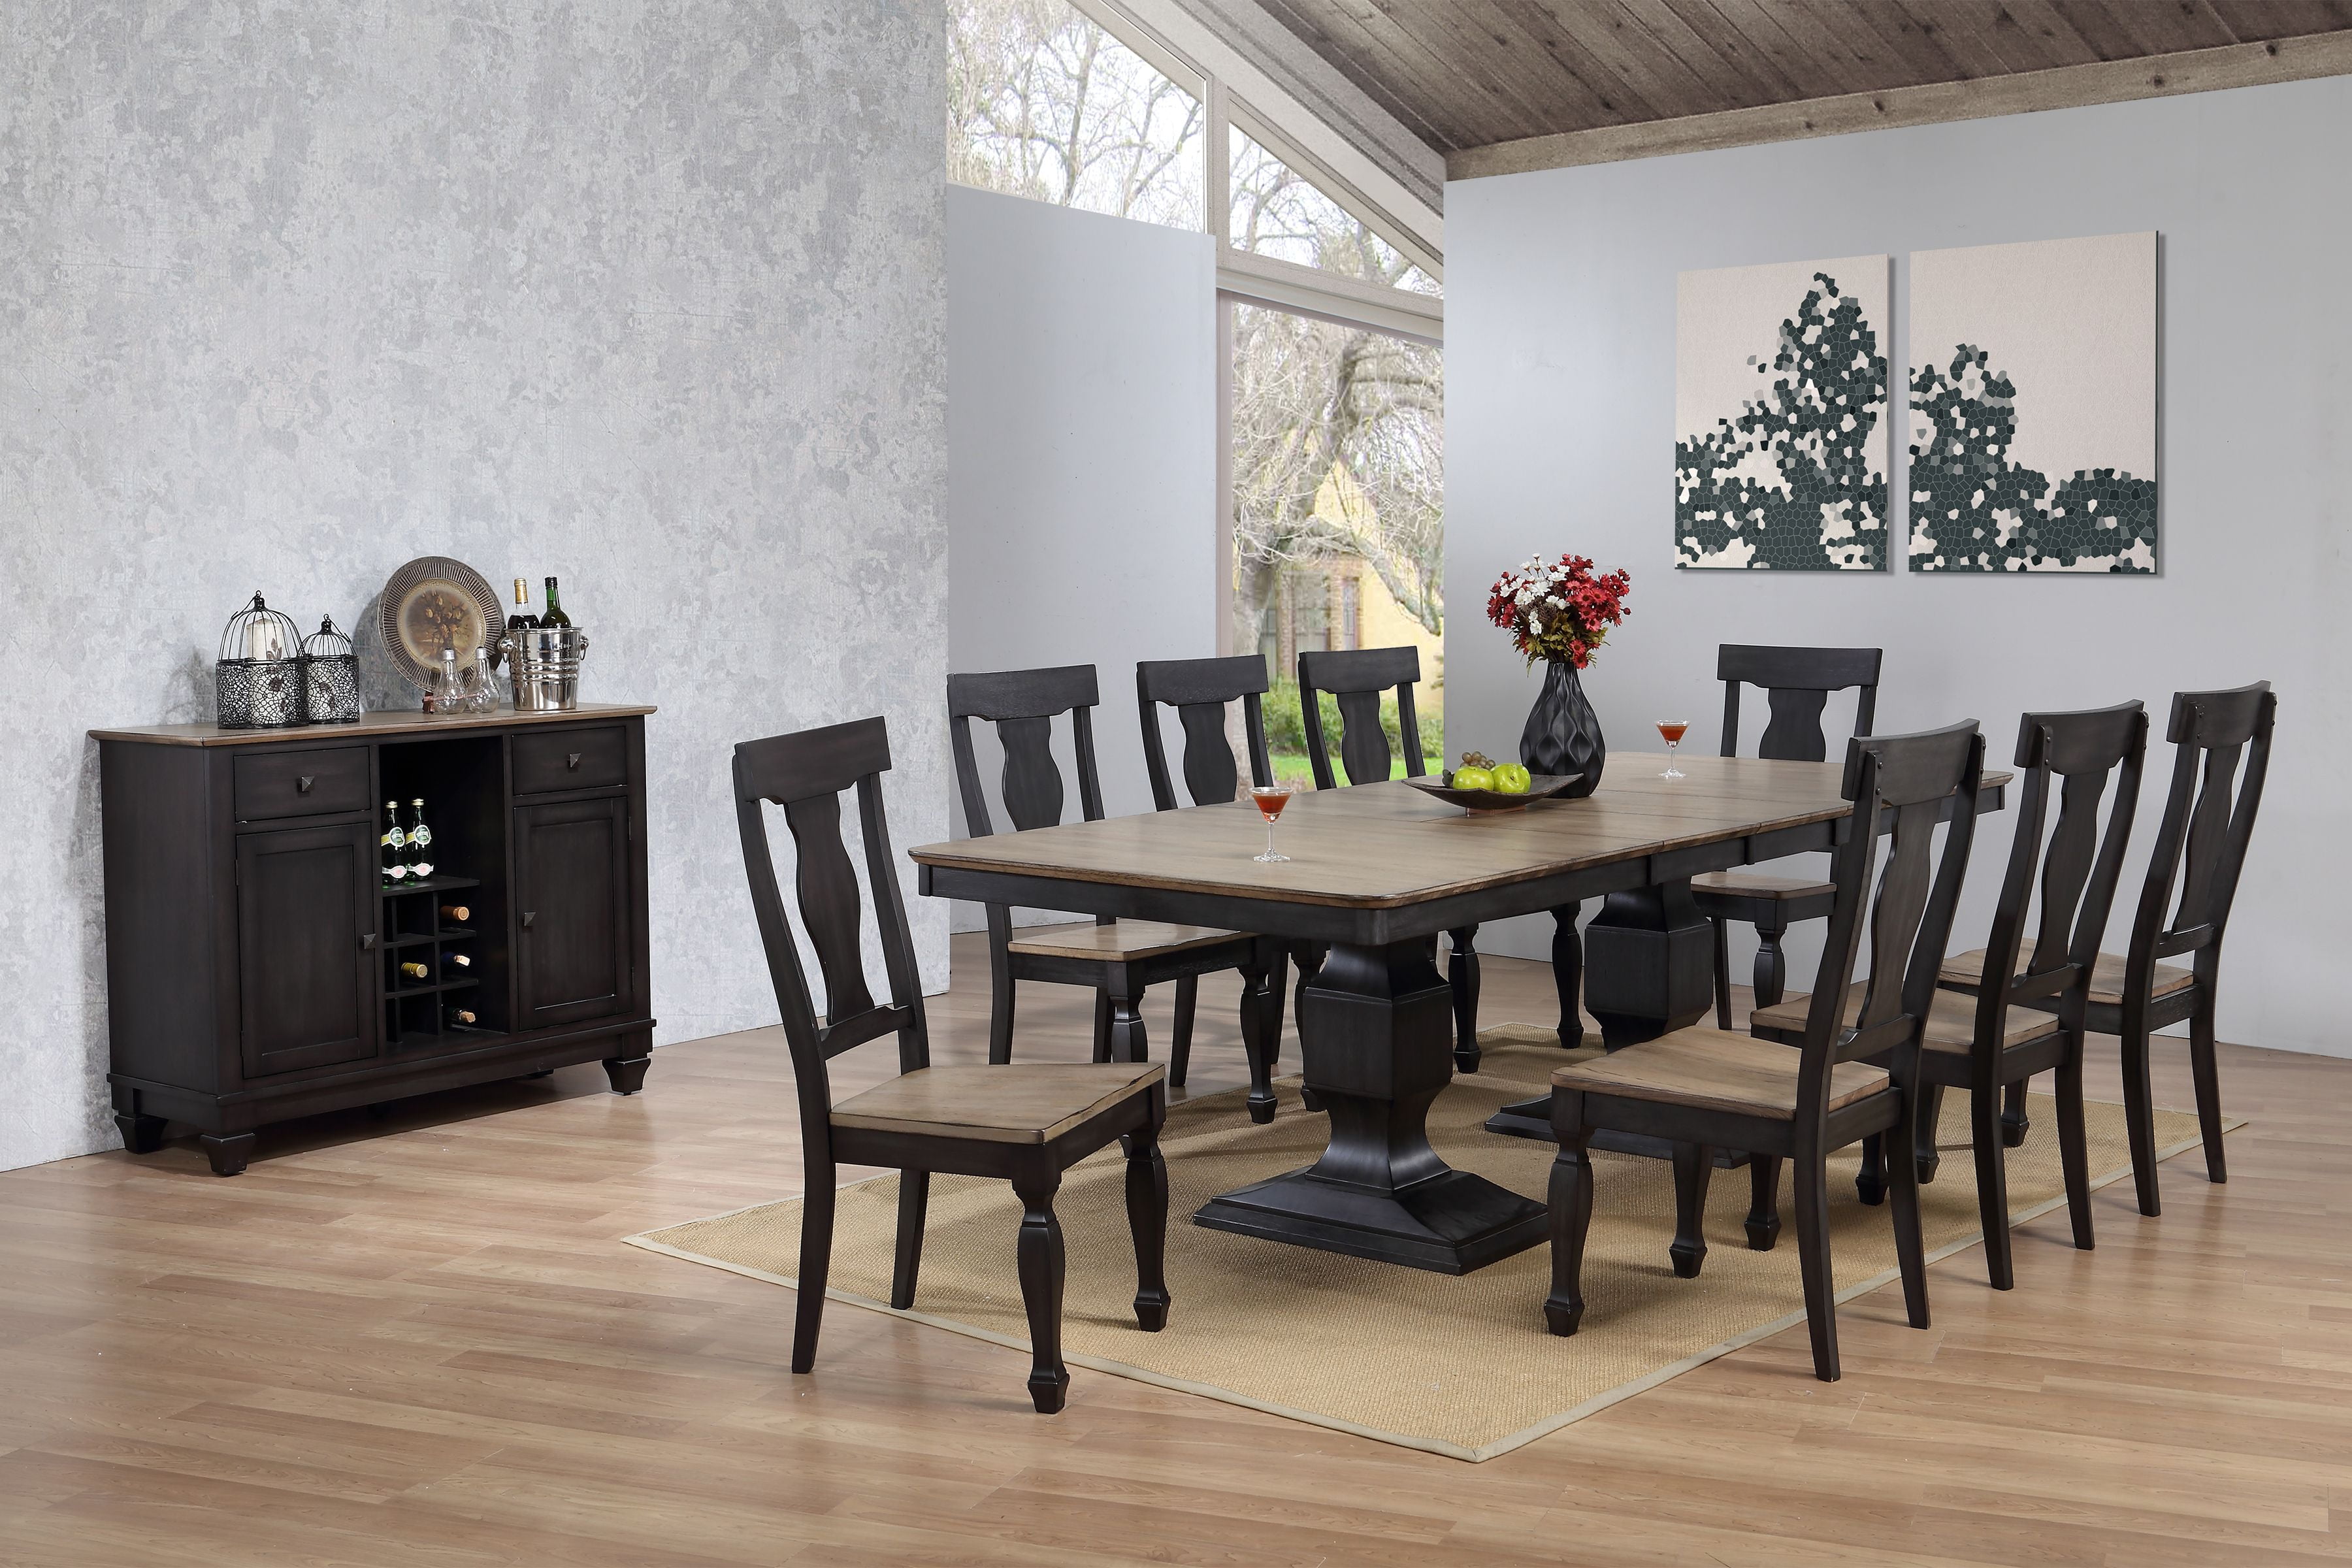 Lowel 10 Piece Formal Dining Room Set, Dining Room Sets With Extendable Tables